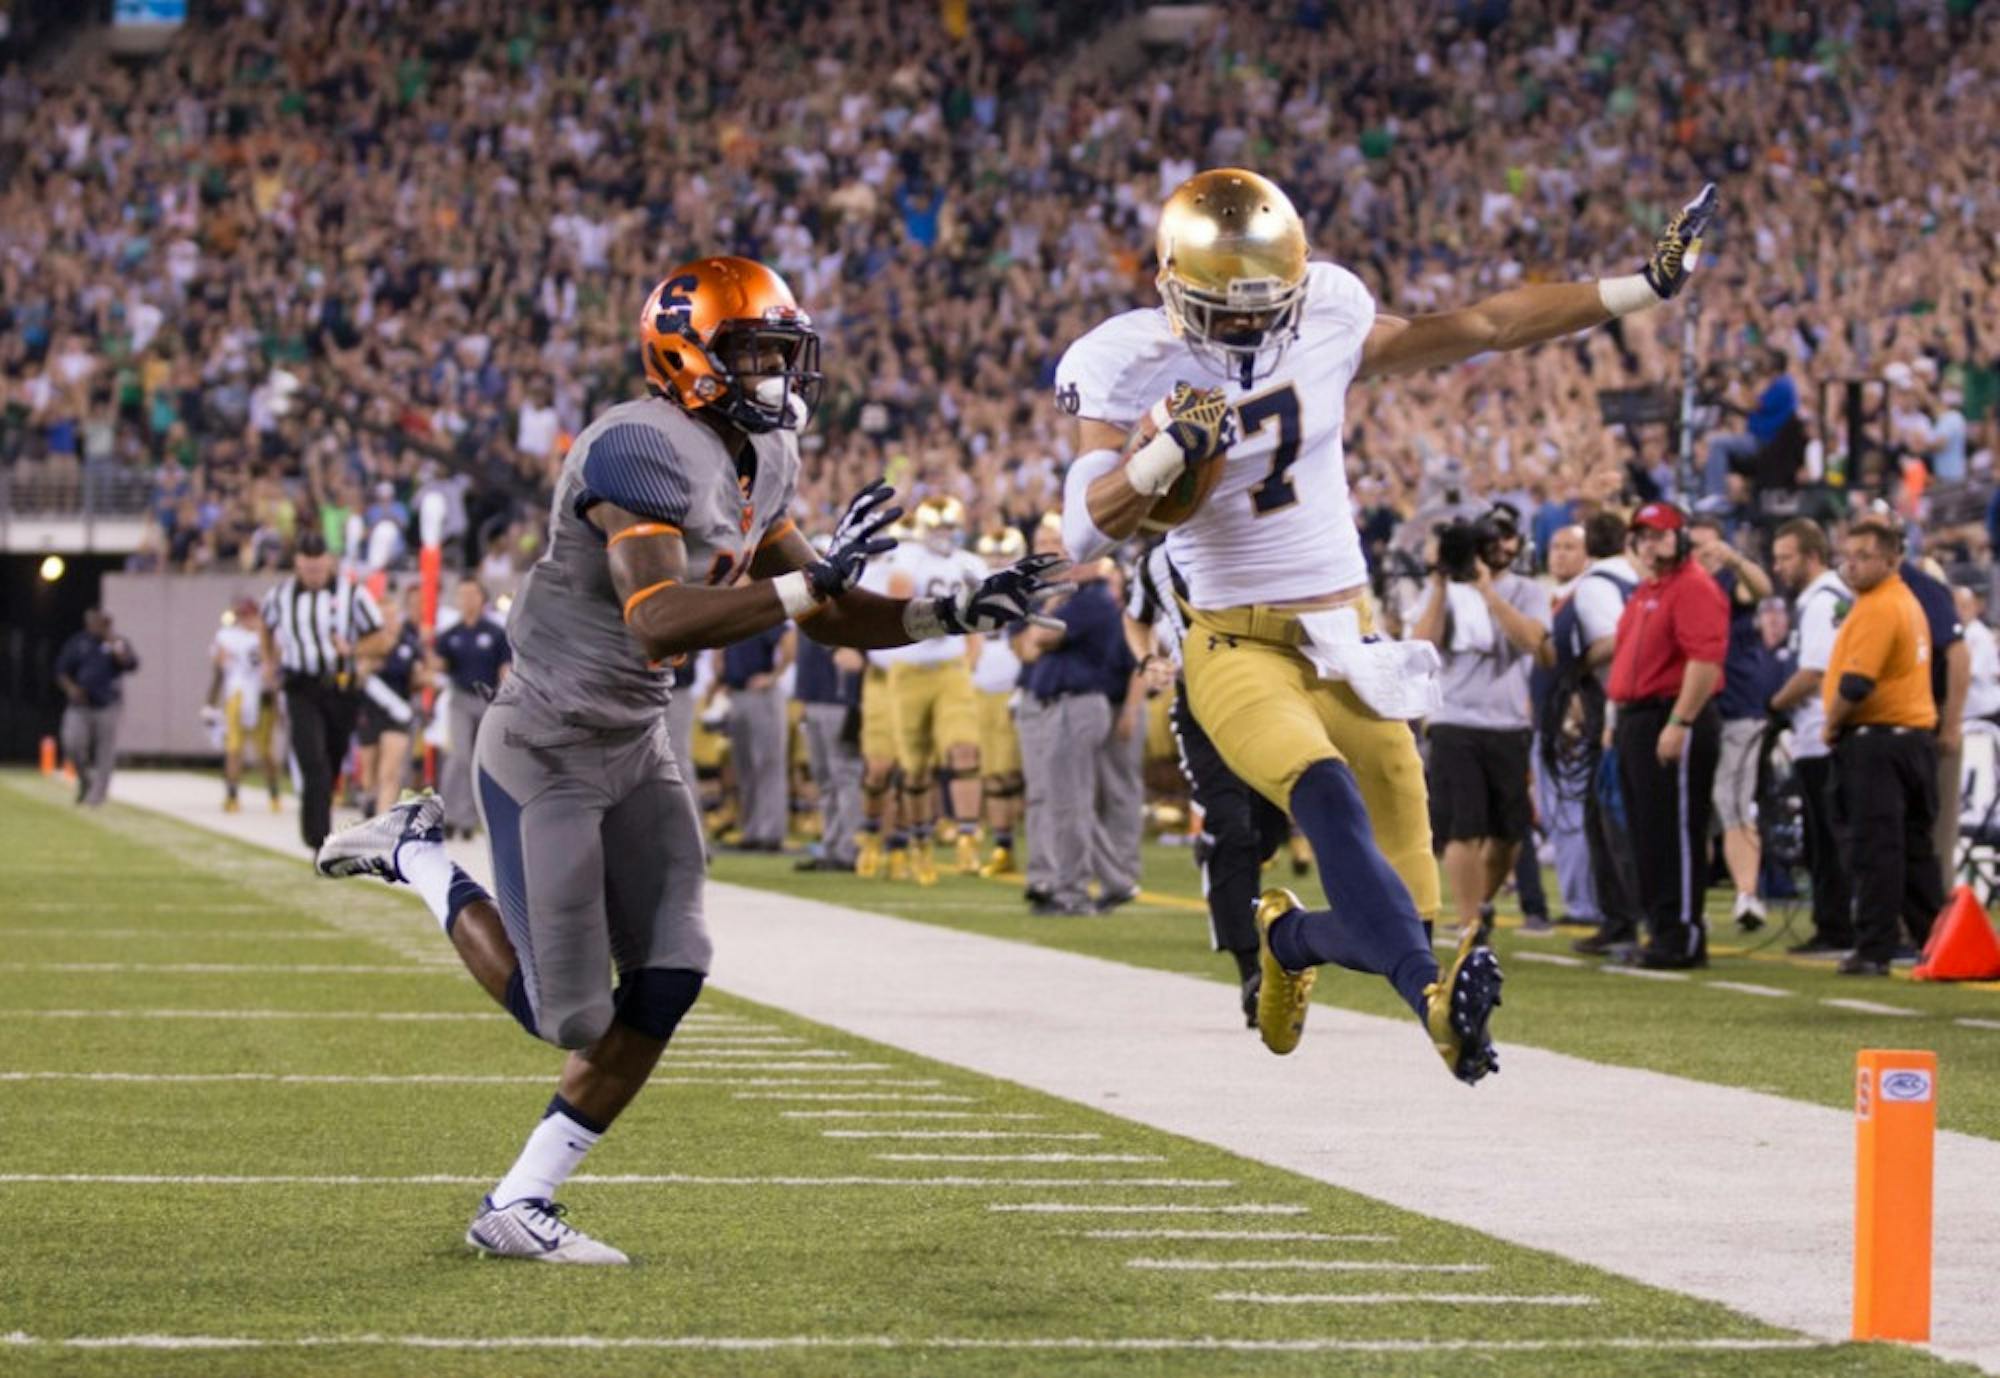 Irish sophomore receiver Will Fuller scores the second of his two touchdowns during Notre Dame’s 31-15 victory over Syracuse on Saturday night at MetLife Stadium in East Rutherford, New Jersey.